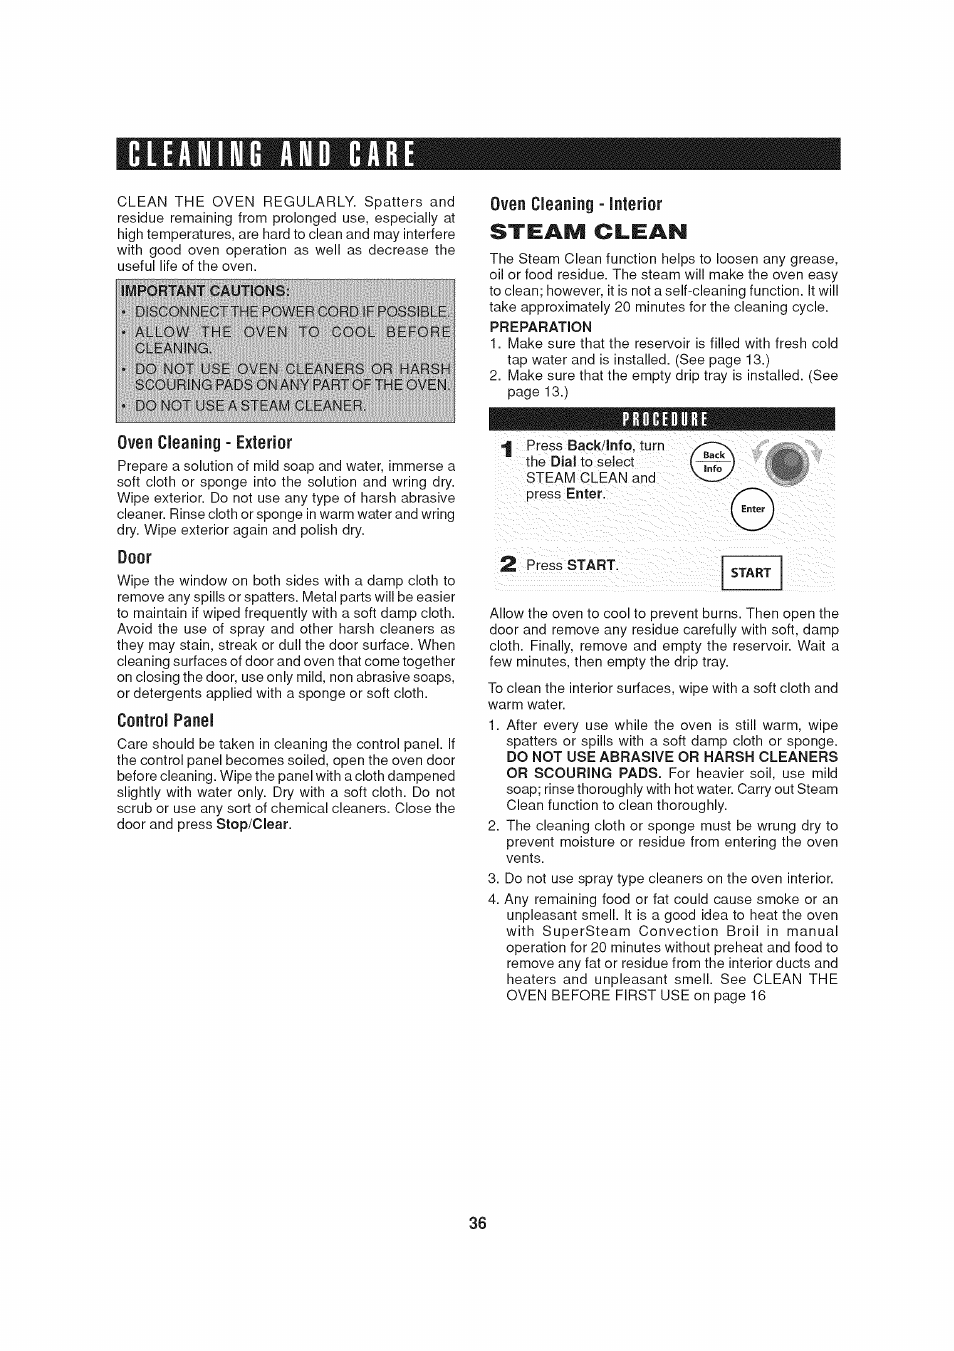 Cleaning and care, Important cautions, Oven cleaning - exterior | Door, Control panel, Oven cleaning - interior steam clean, Procedure, Important instructions -15, Cleaning and care -37 | Sharp AX-1200 User Manual | Page 38 / 43